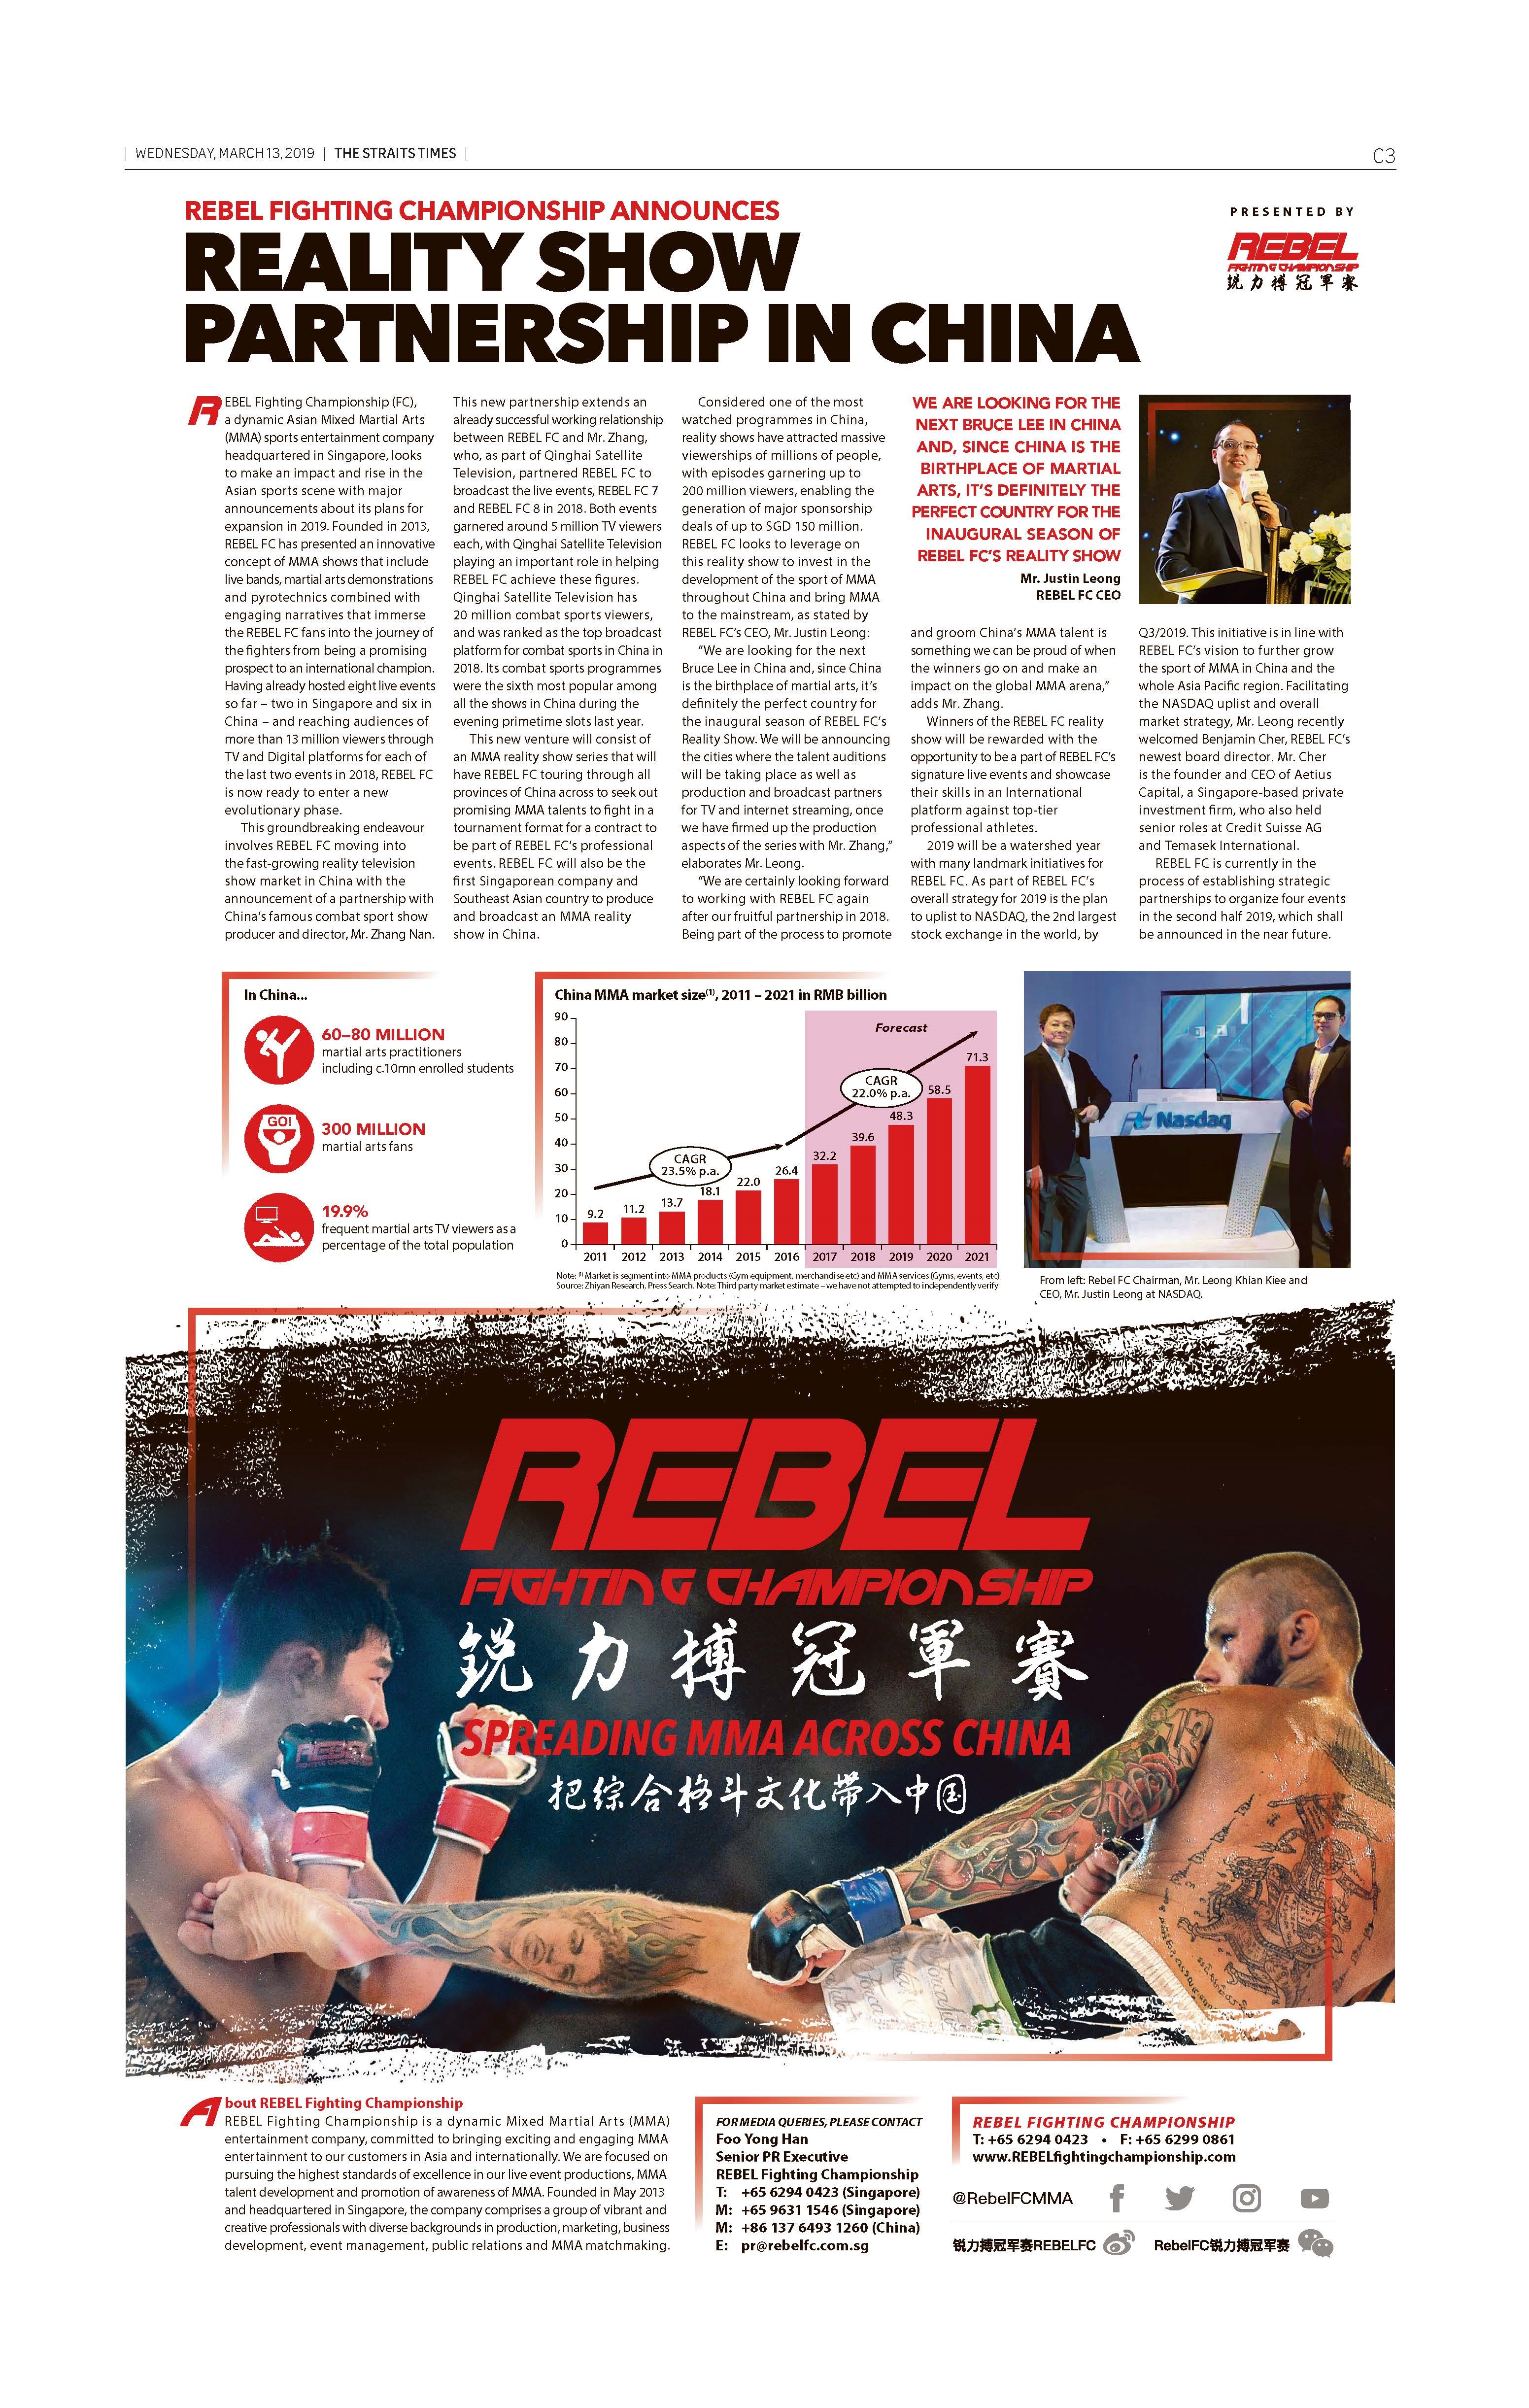 REBEL Fighting Championship Announces Reality Show Partnership in China -